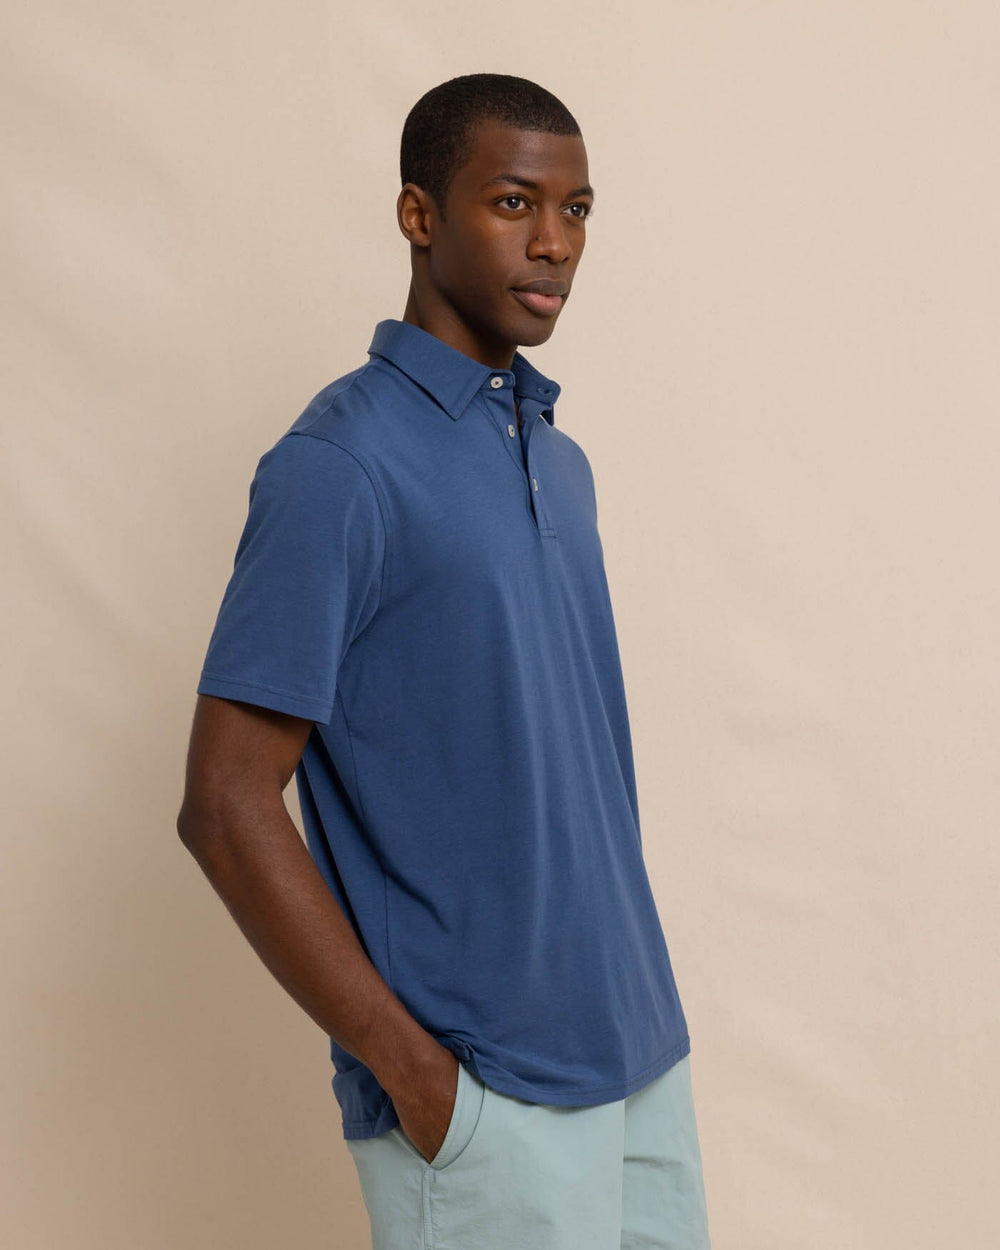 The front view of the Southern Tide The Seaport Polo by Southern Tide - Aged Denim